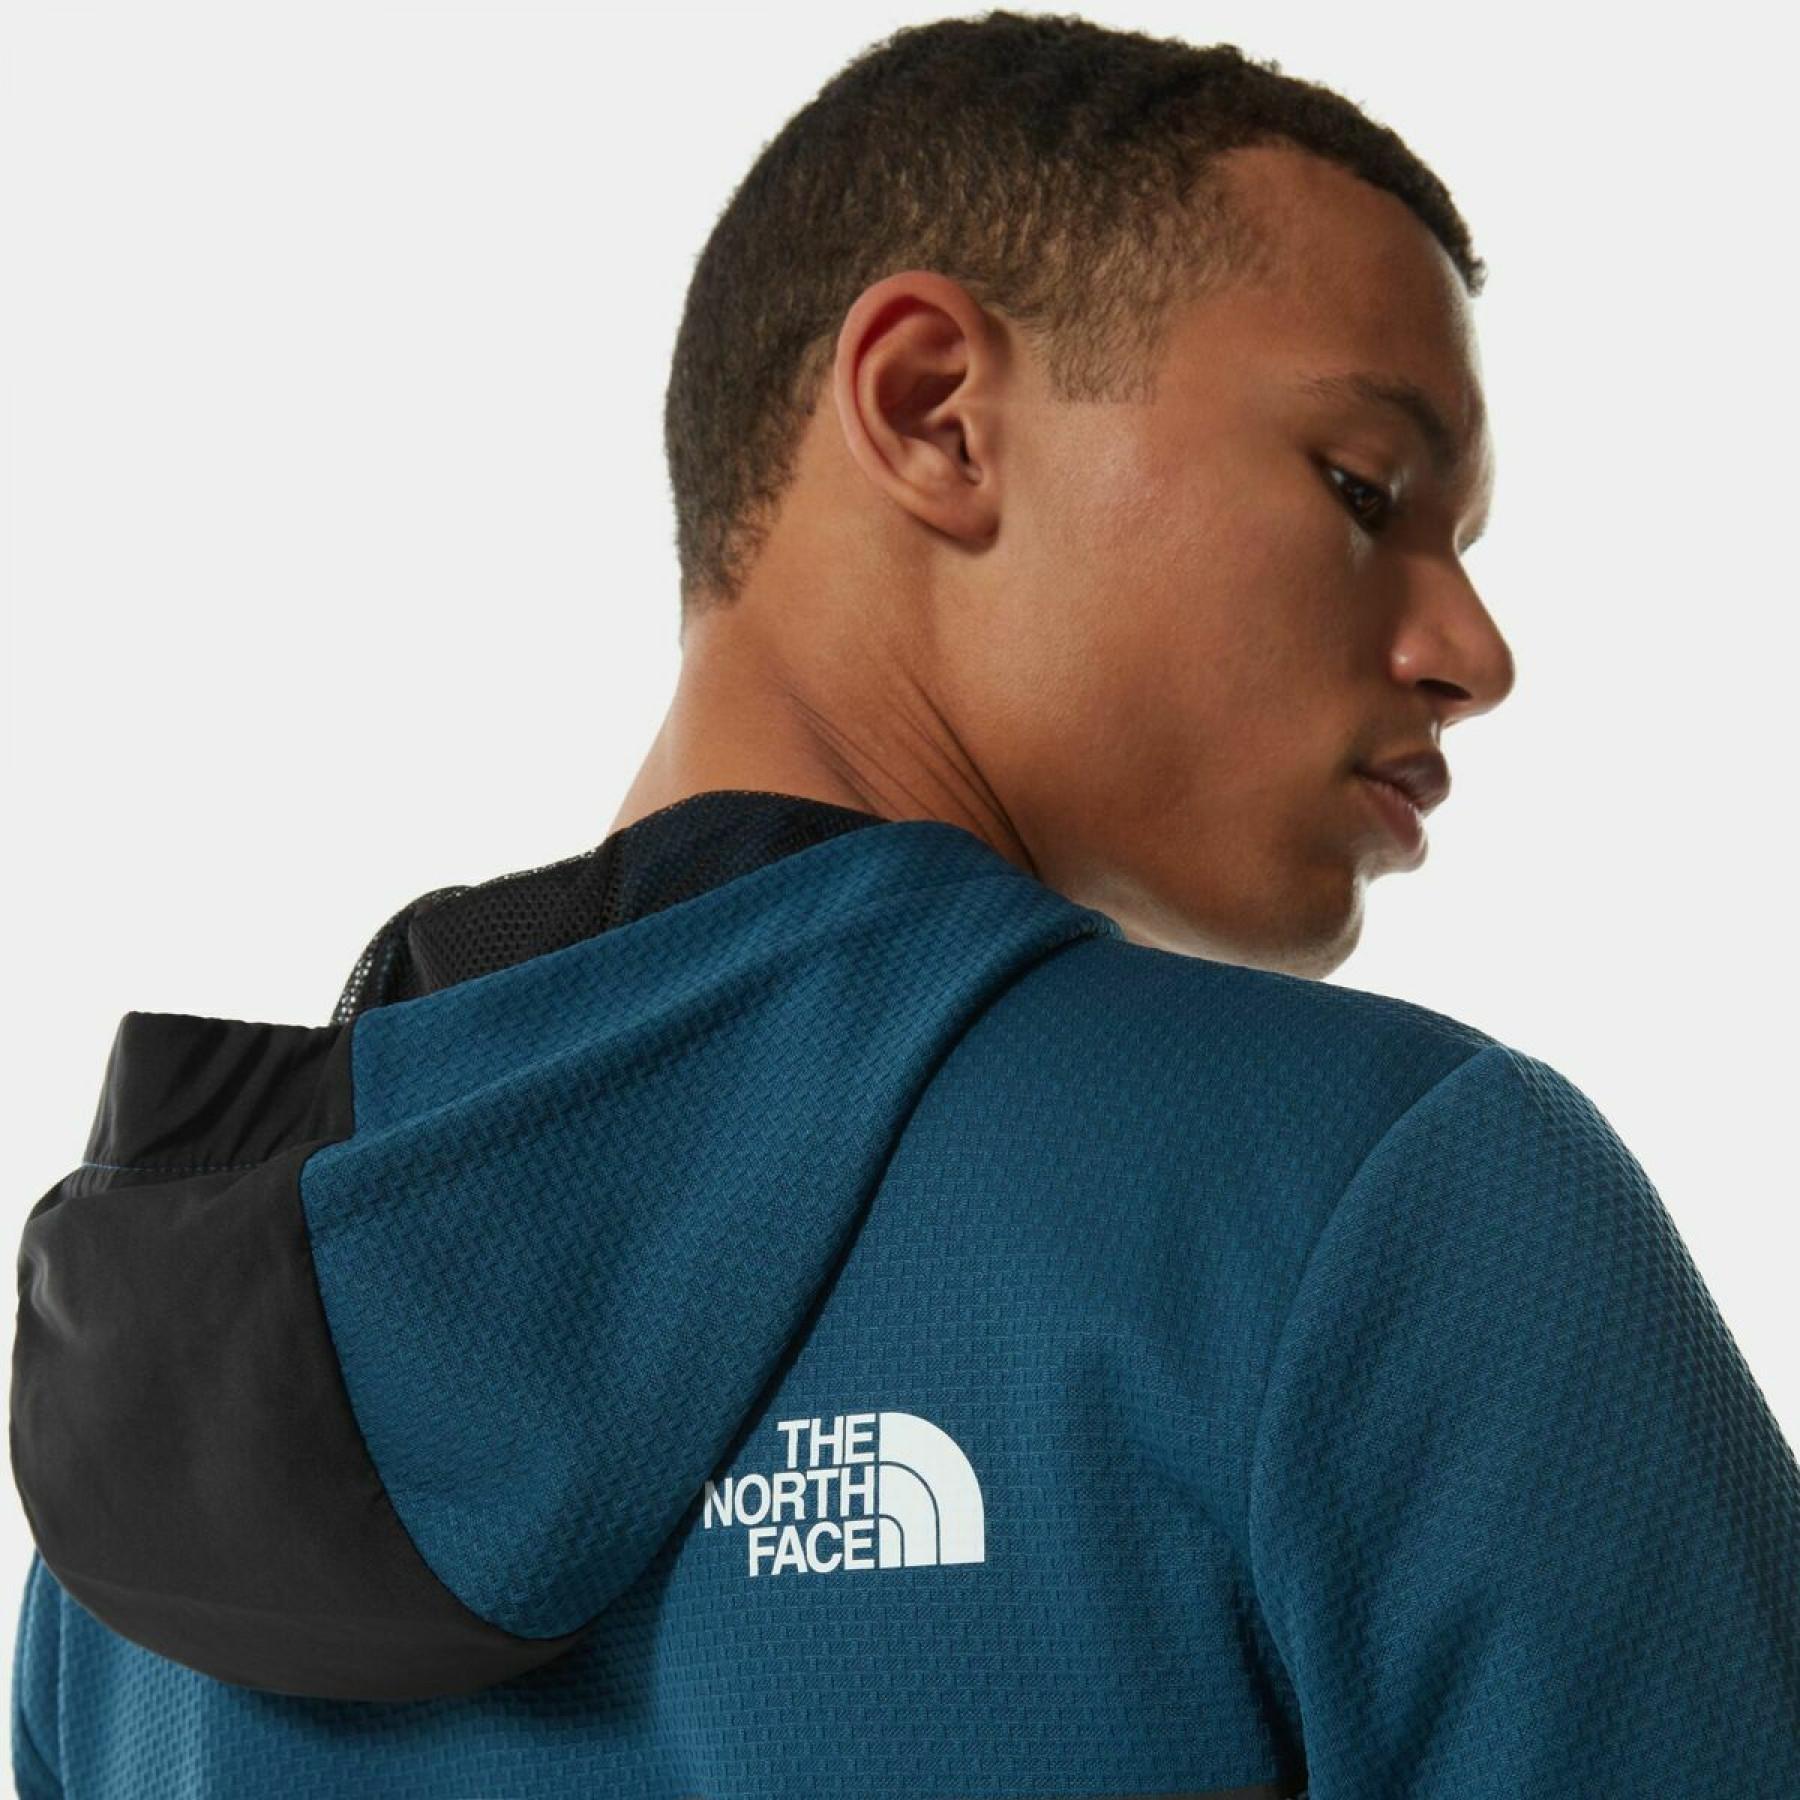 Jacka The North Face Overlay